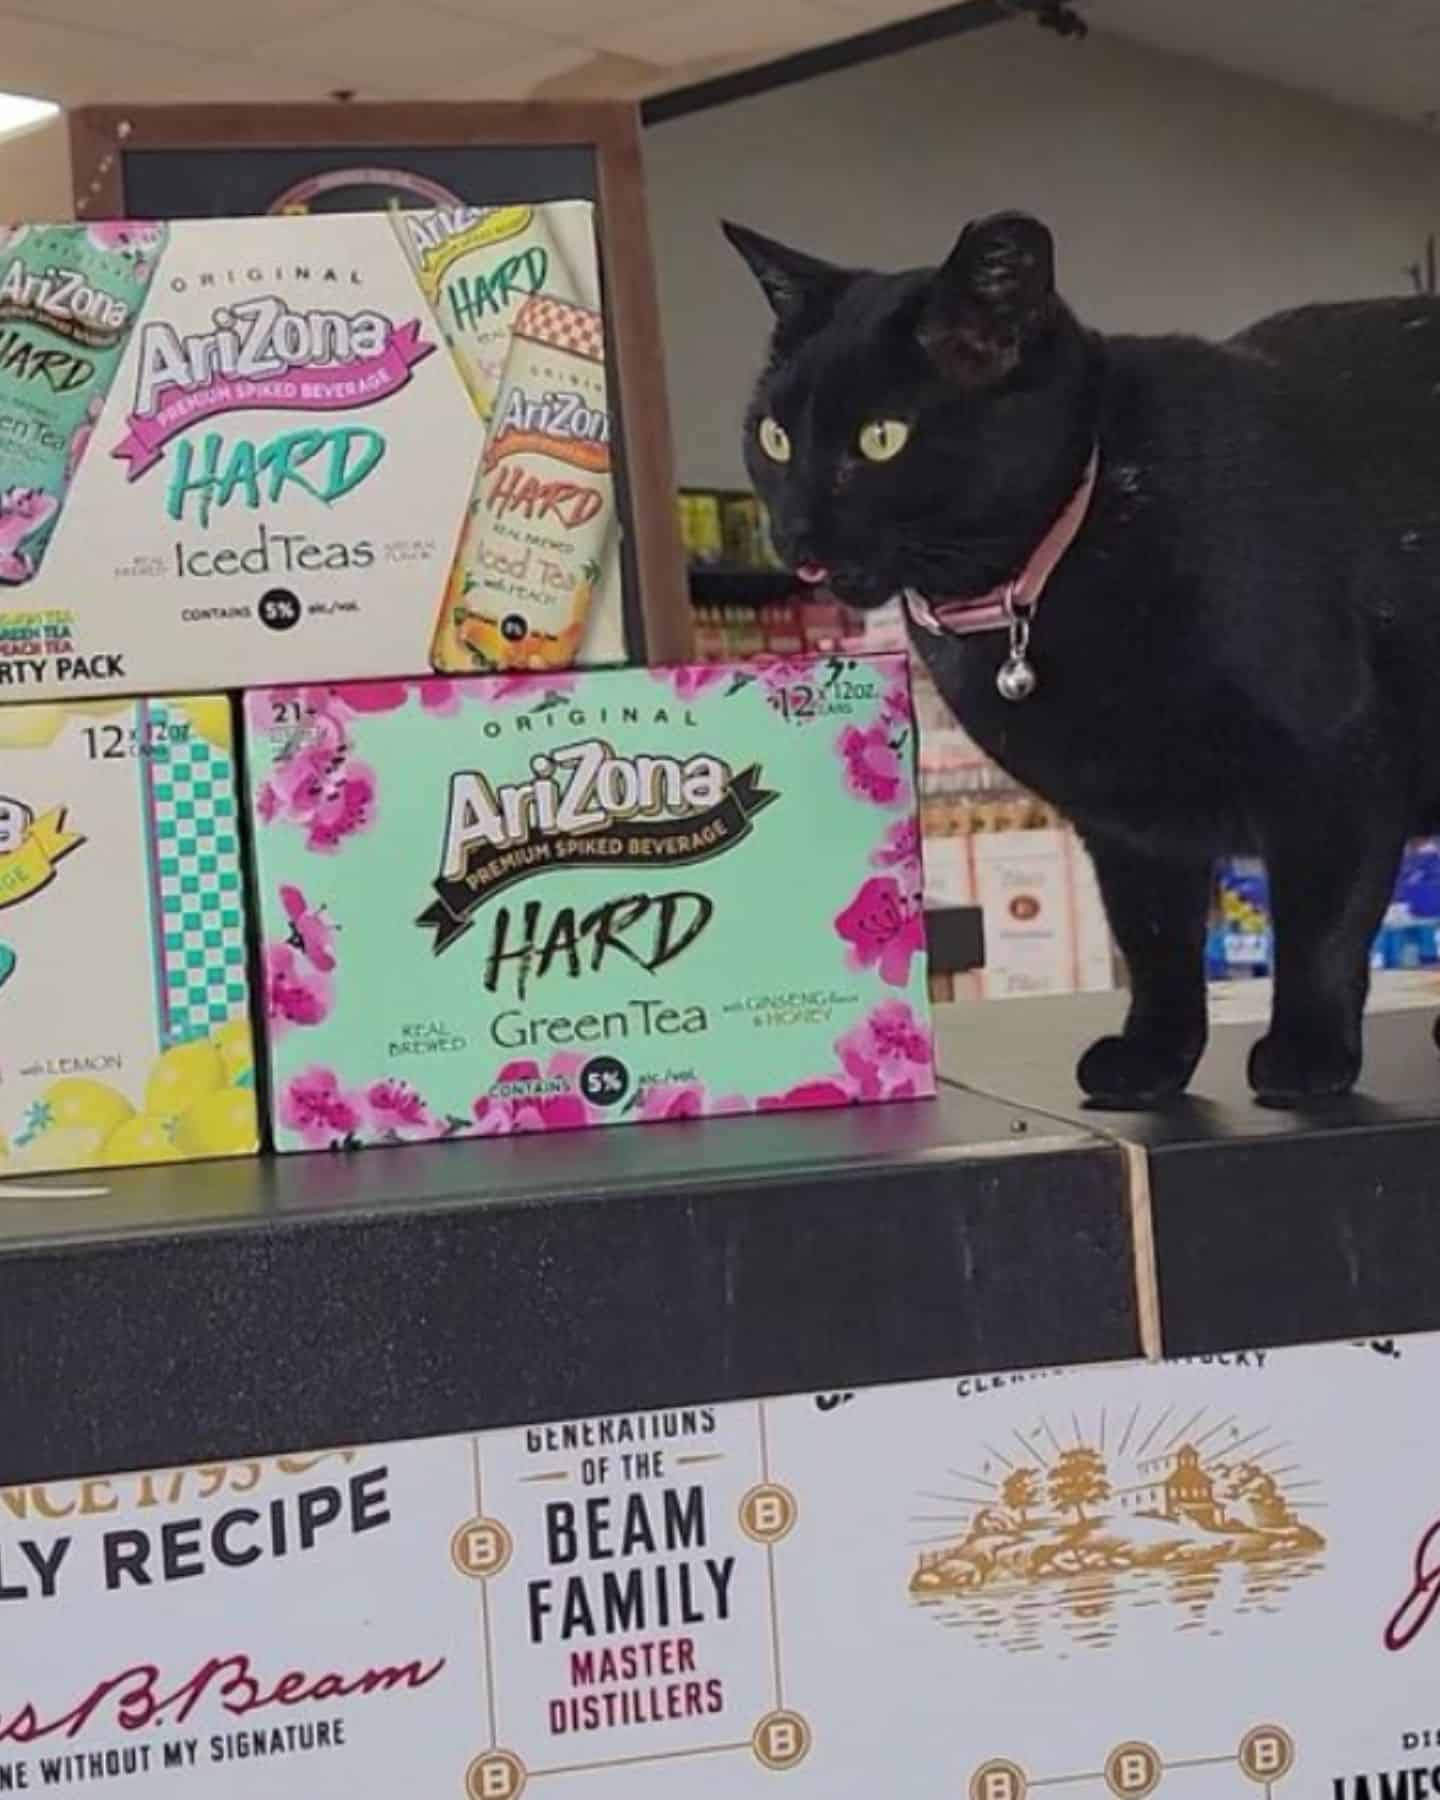 a cat on a shelf with cartons of beer